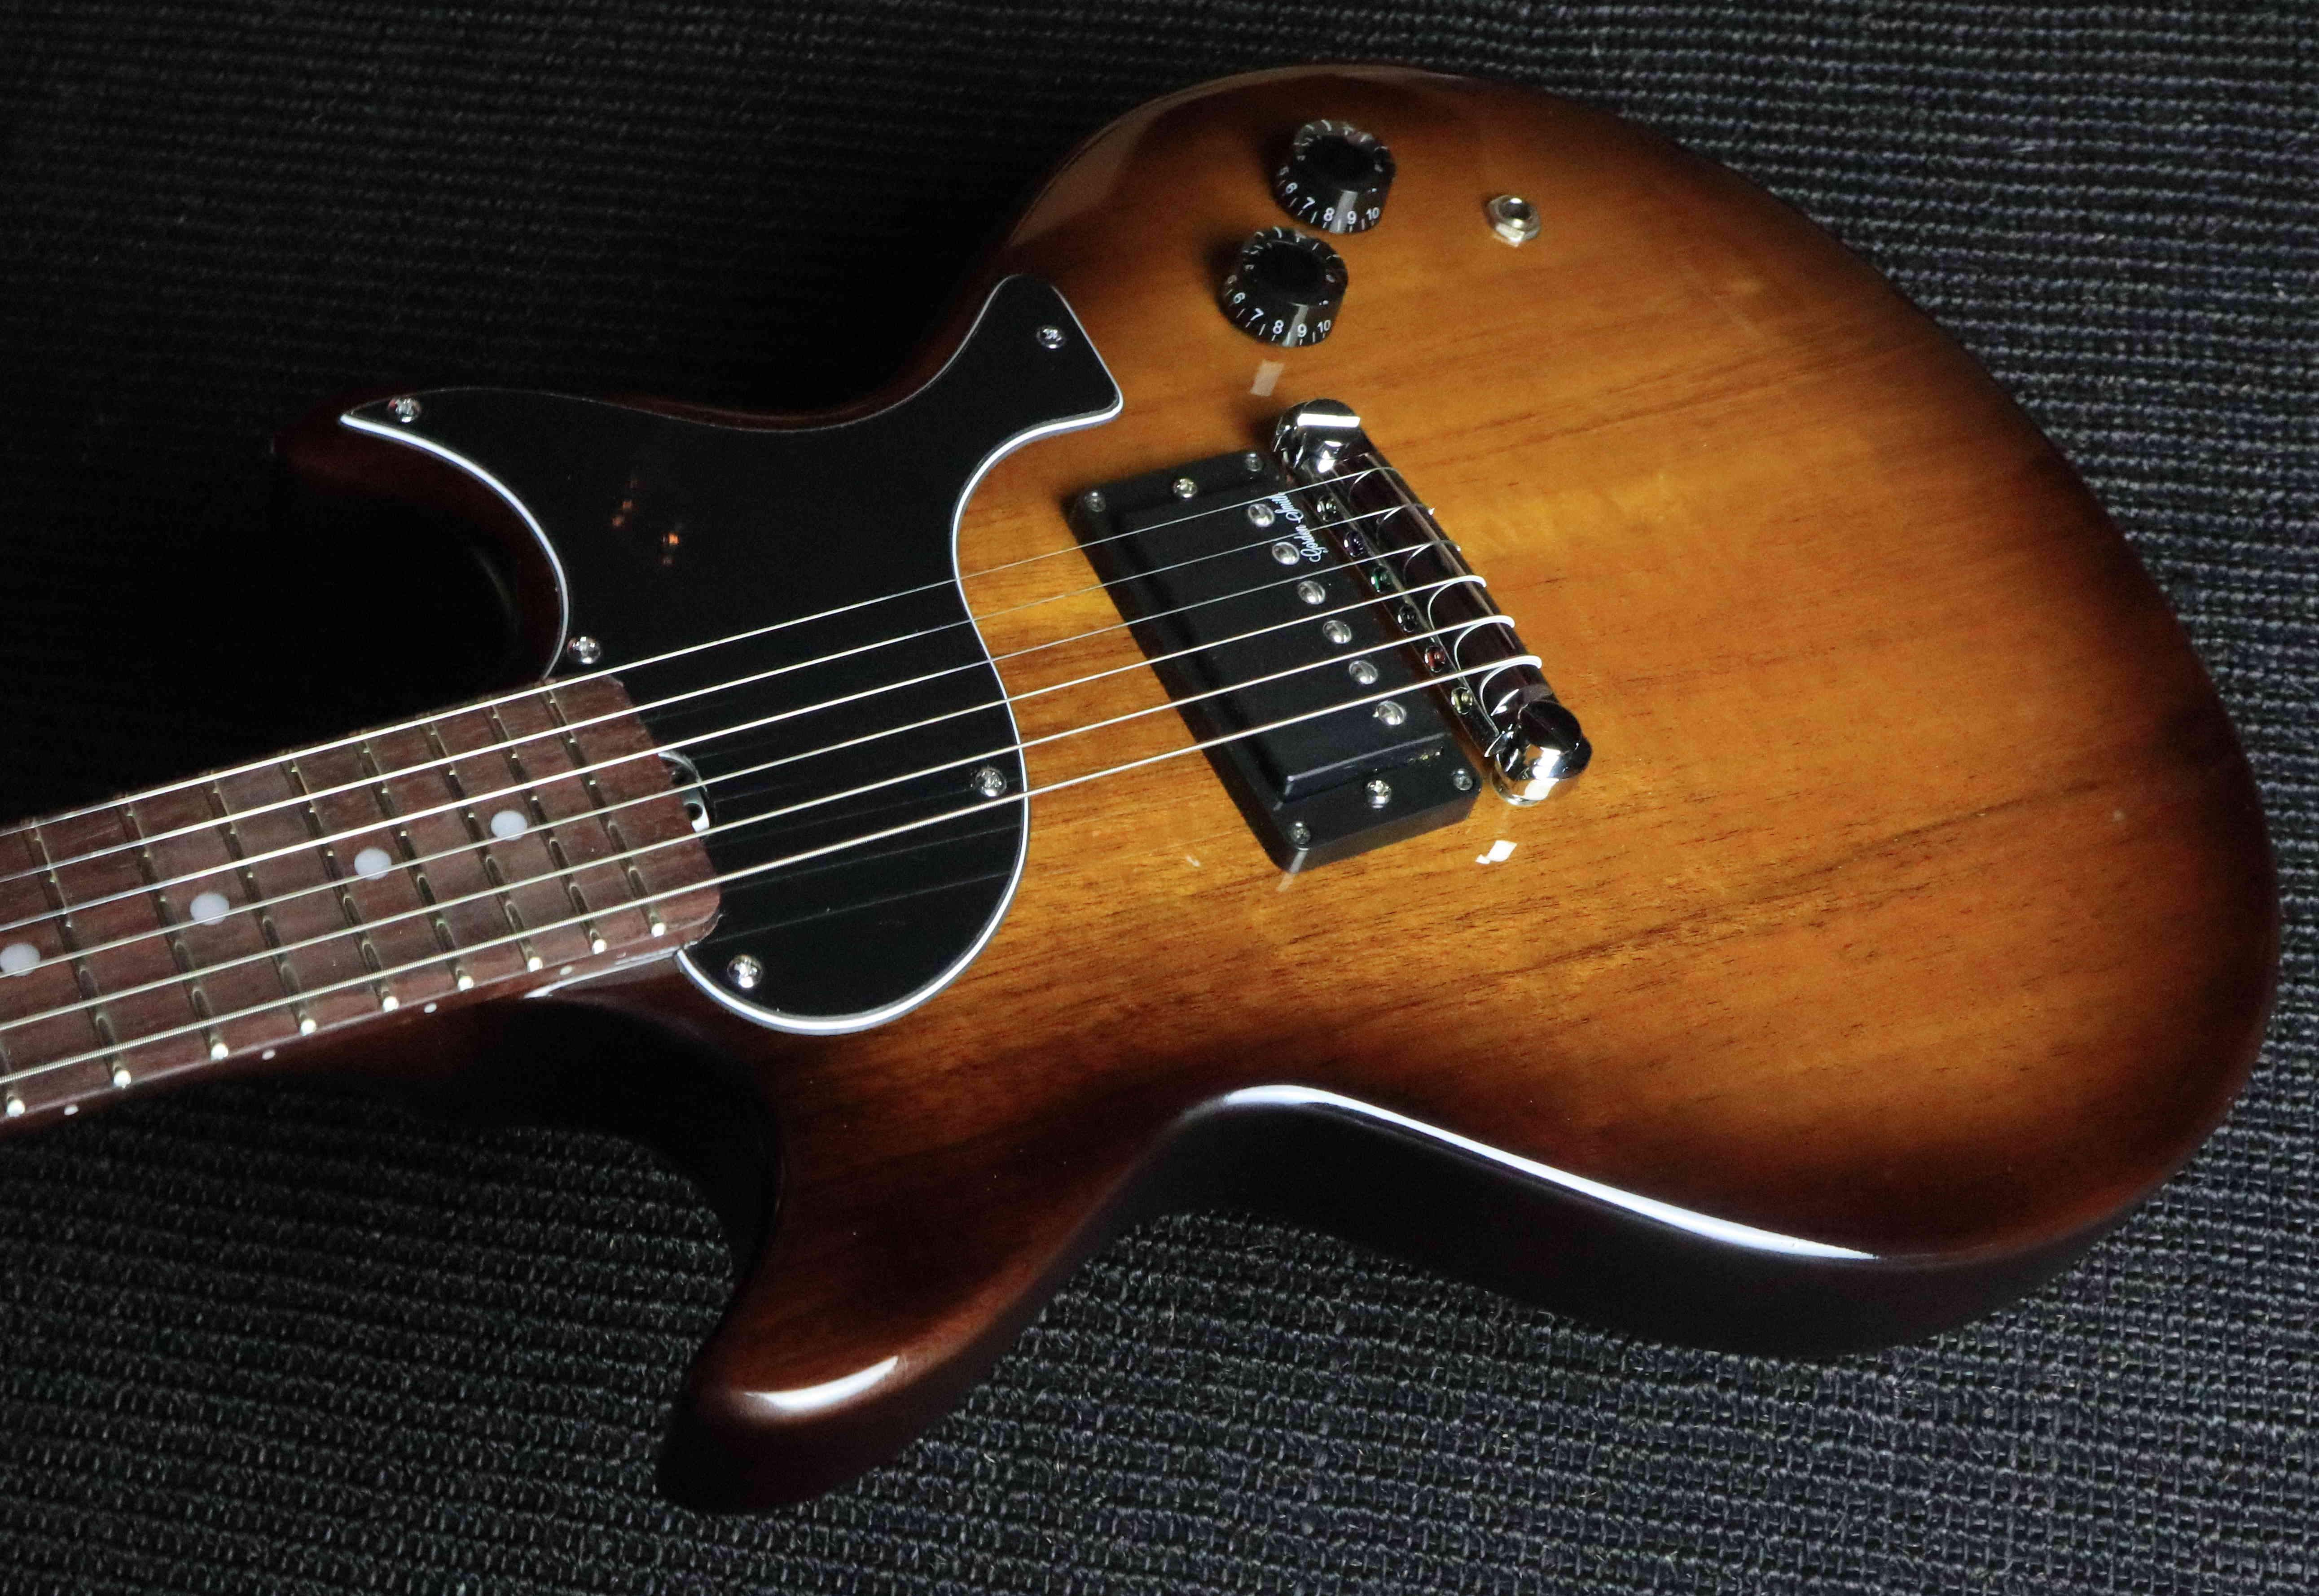 Gordon Smith Heritage GS1 Tobacco Burst SN: 18124, Electric Guitar for sale at Richards Guitars.